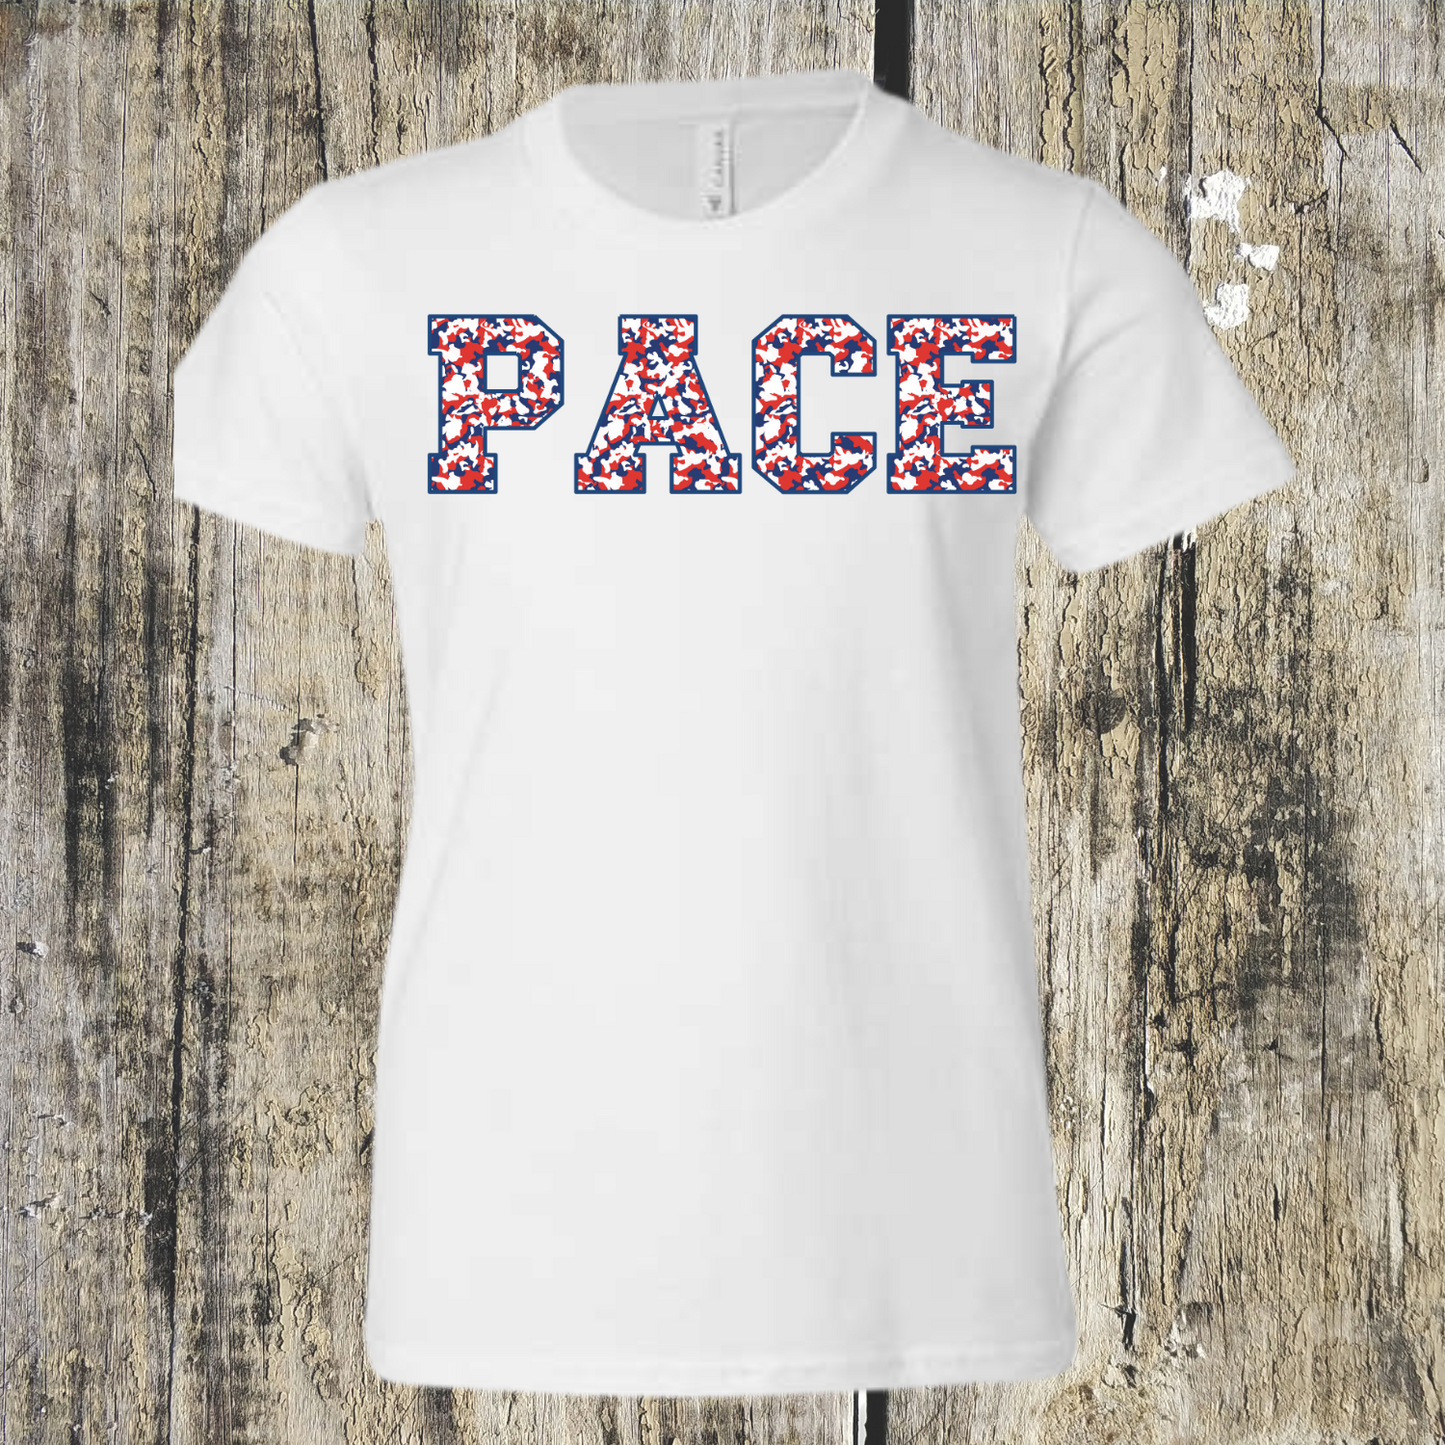 Pace Red + White + Blue Camo Tee YOUTH